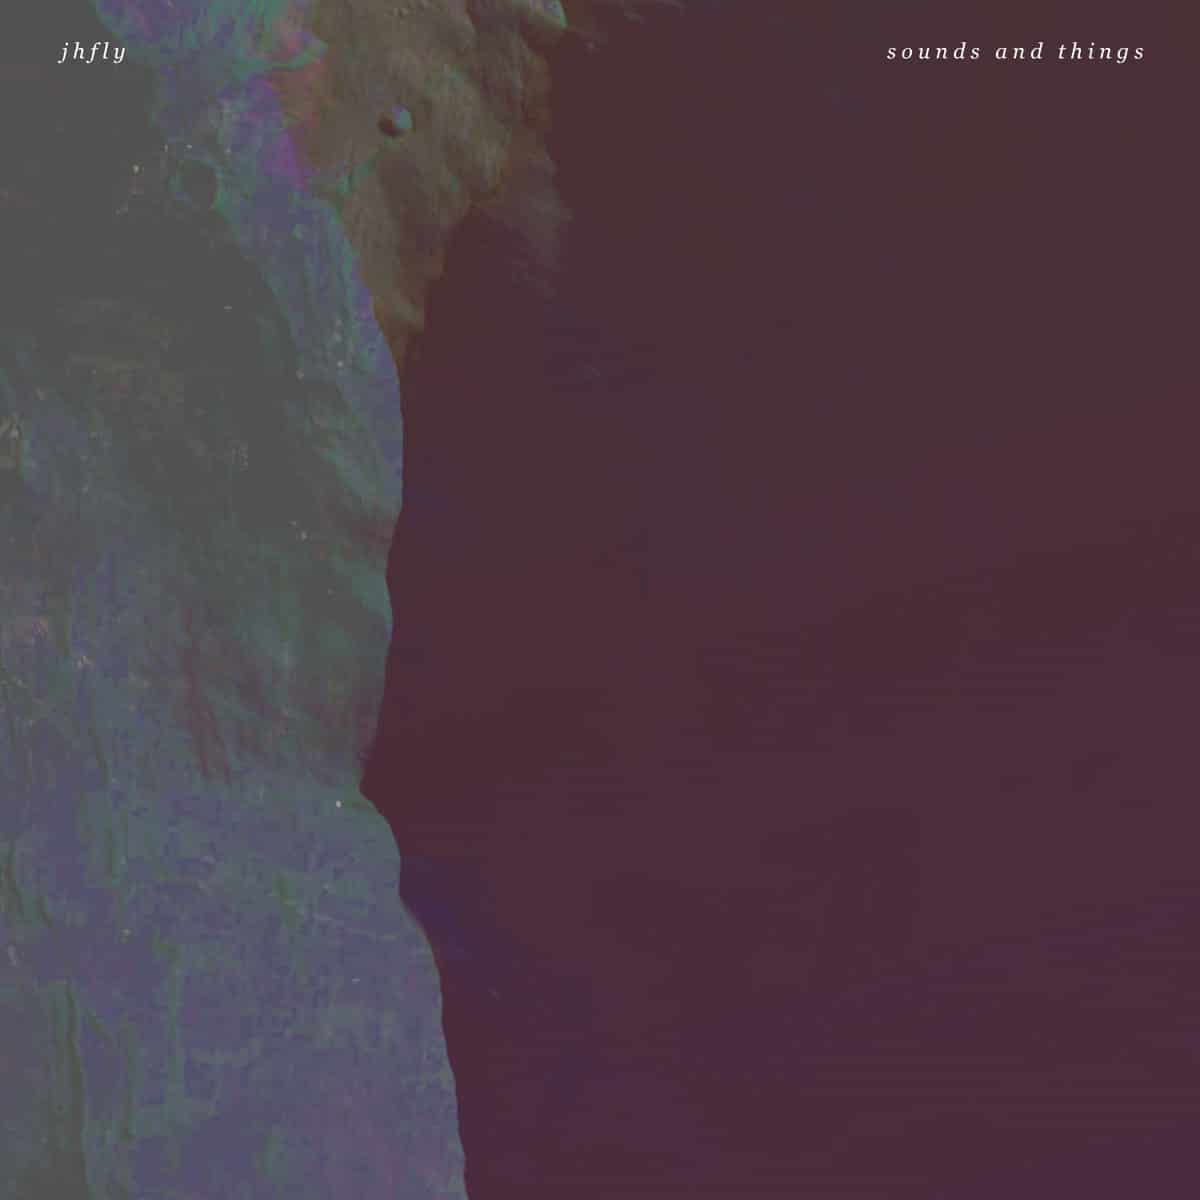 jhfly - "sounds and things" (Release)